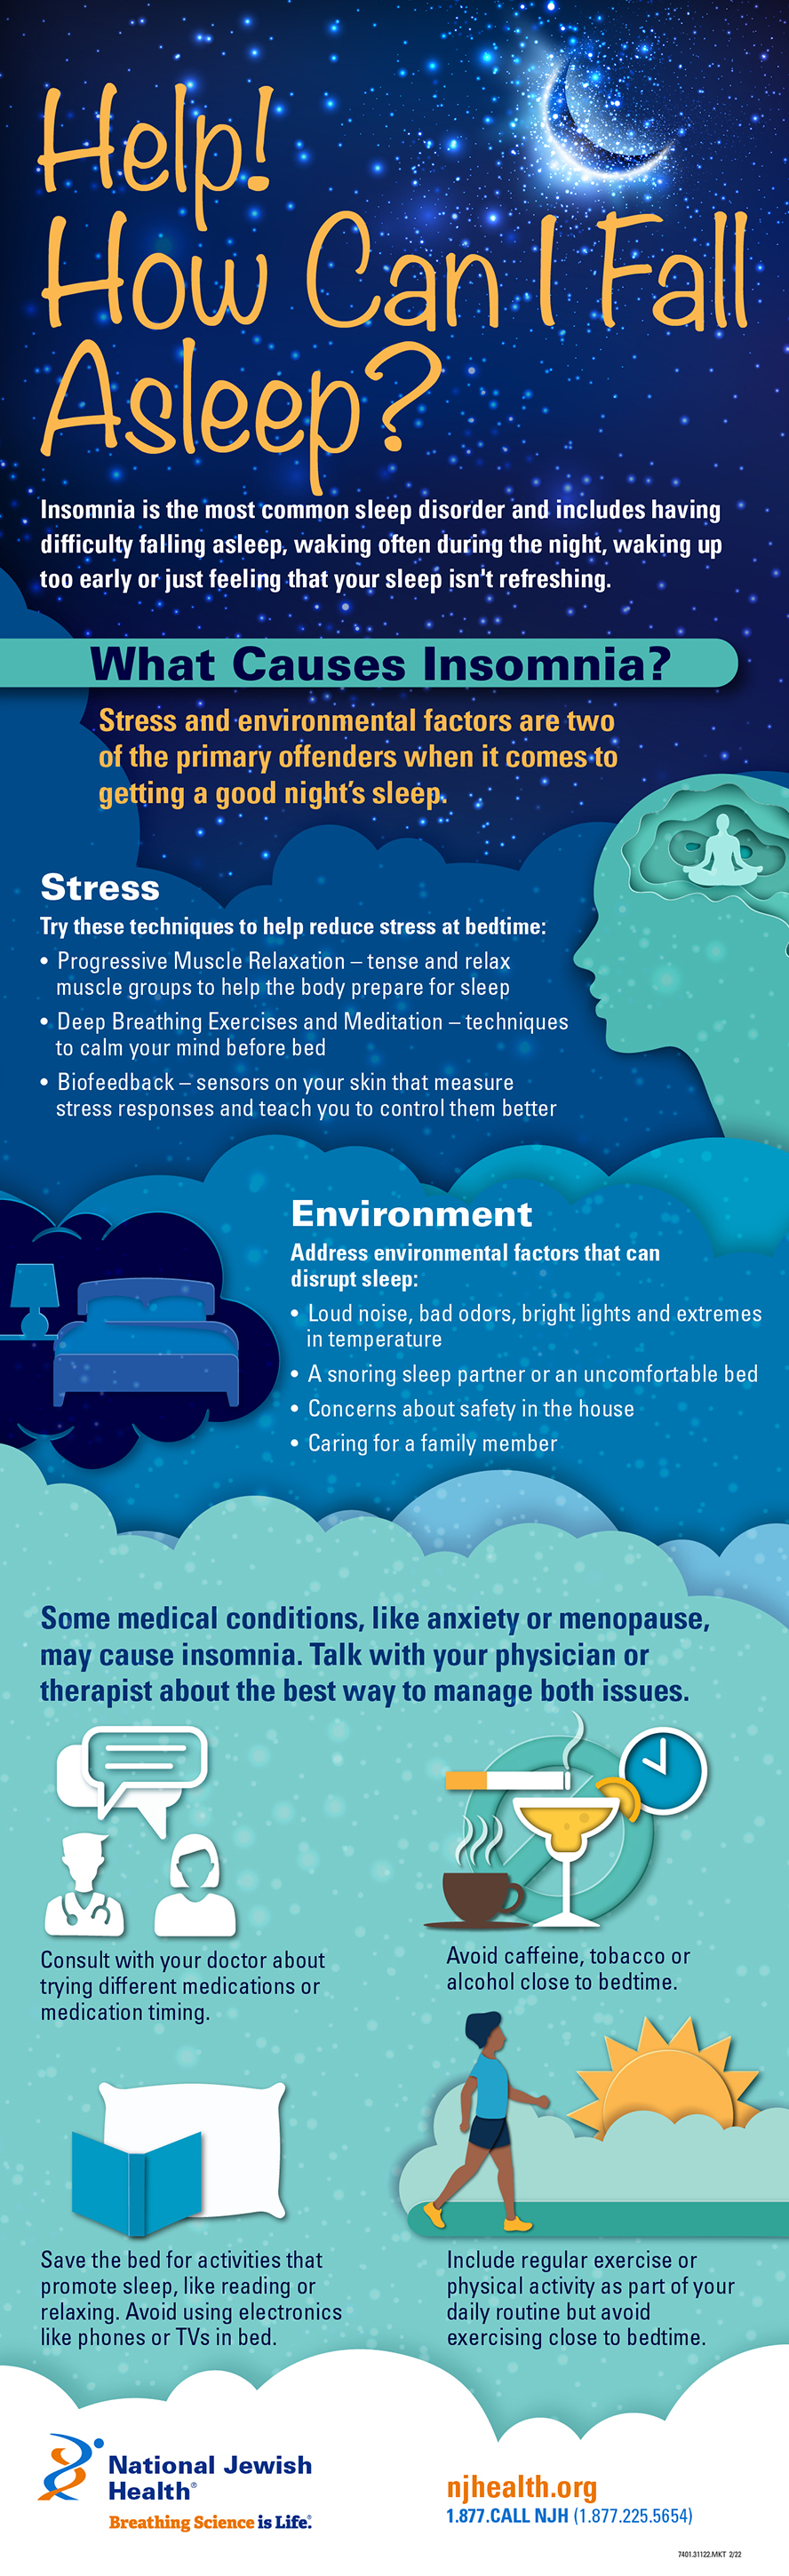 how can i fall asleep infographic